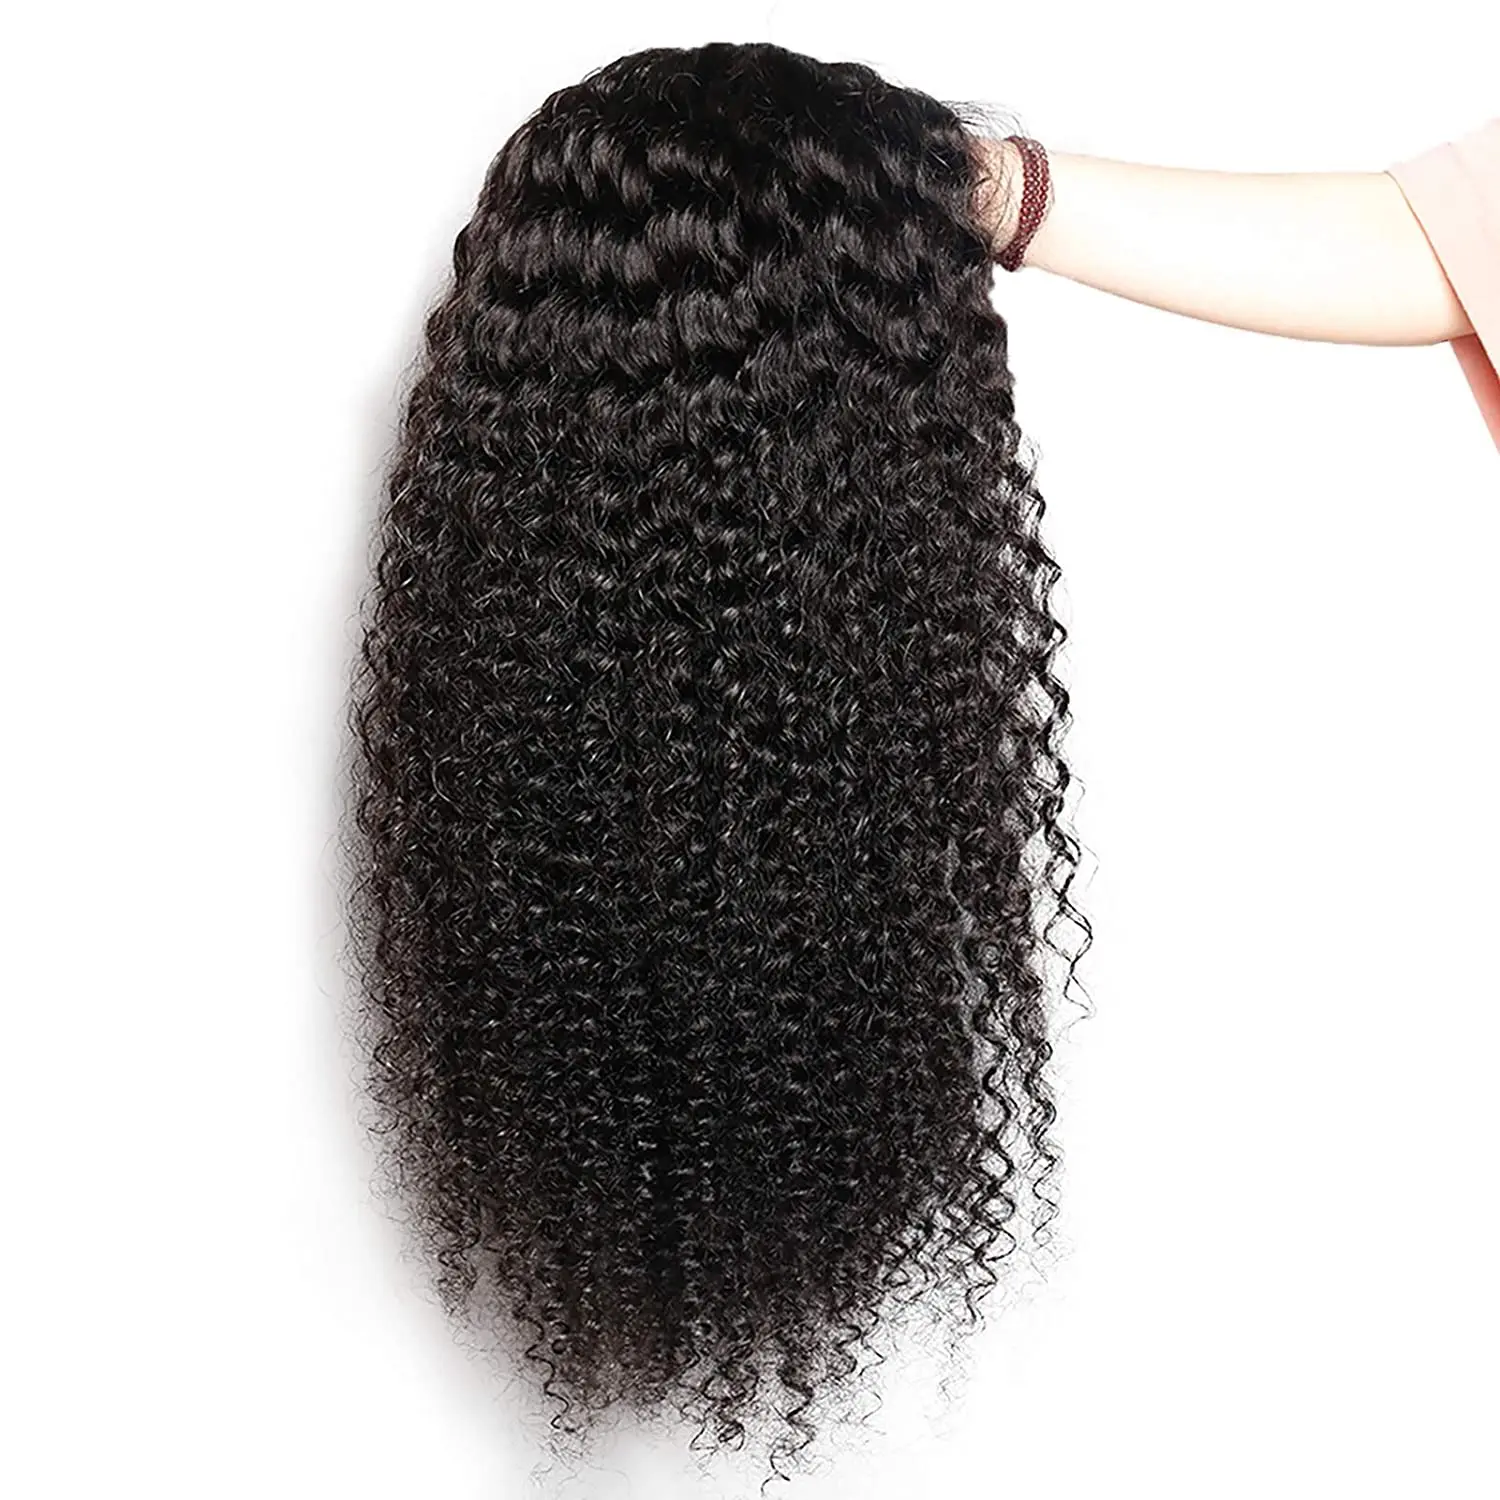 

13x4 13x6 Hd Lace Frontal Wig Remy Hair Average Size Swiss Lace Front Wig Long Kinky Curly Indian Hair Wigs